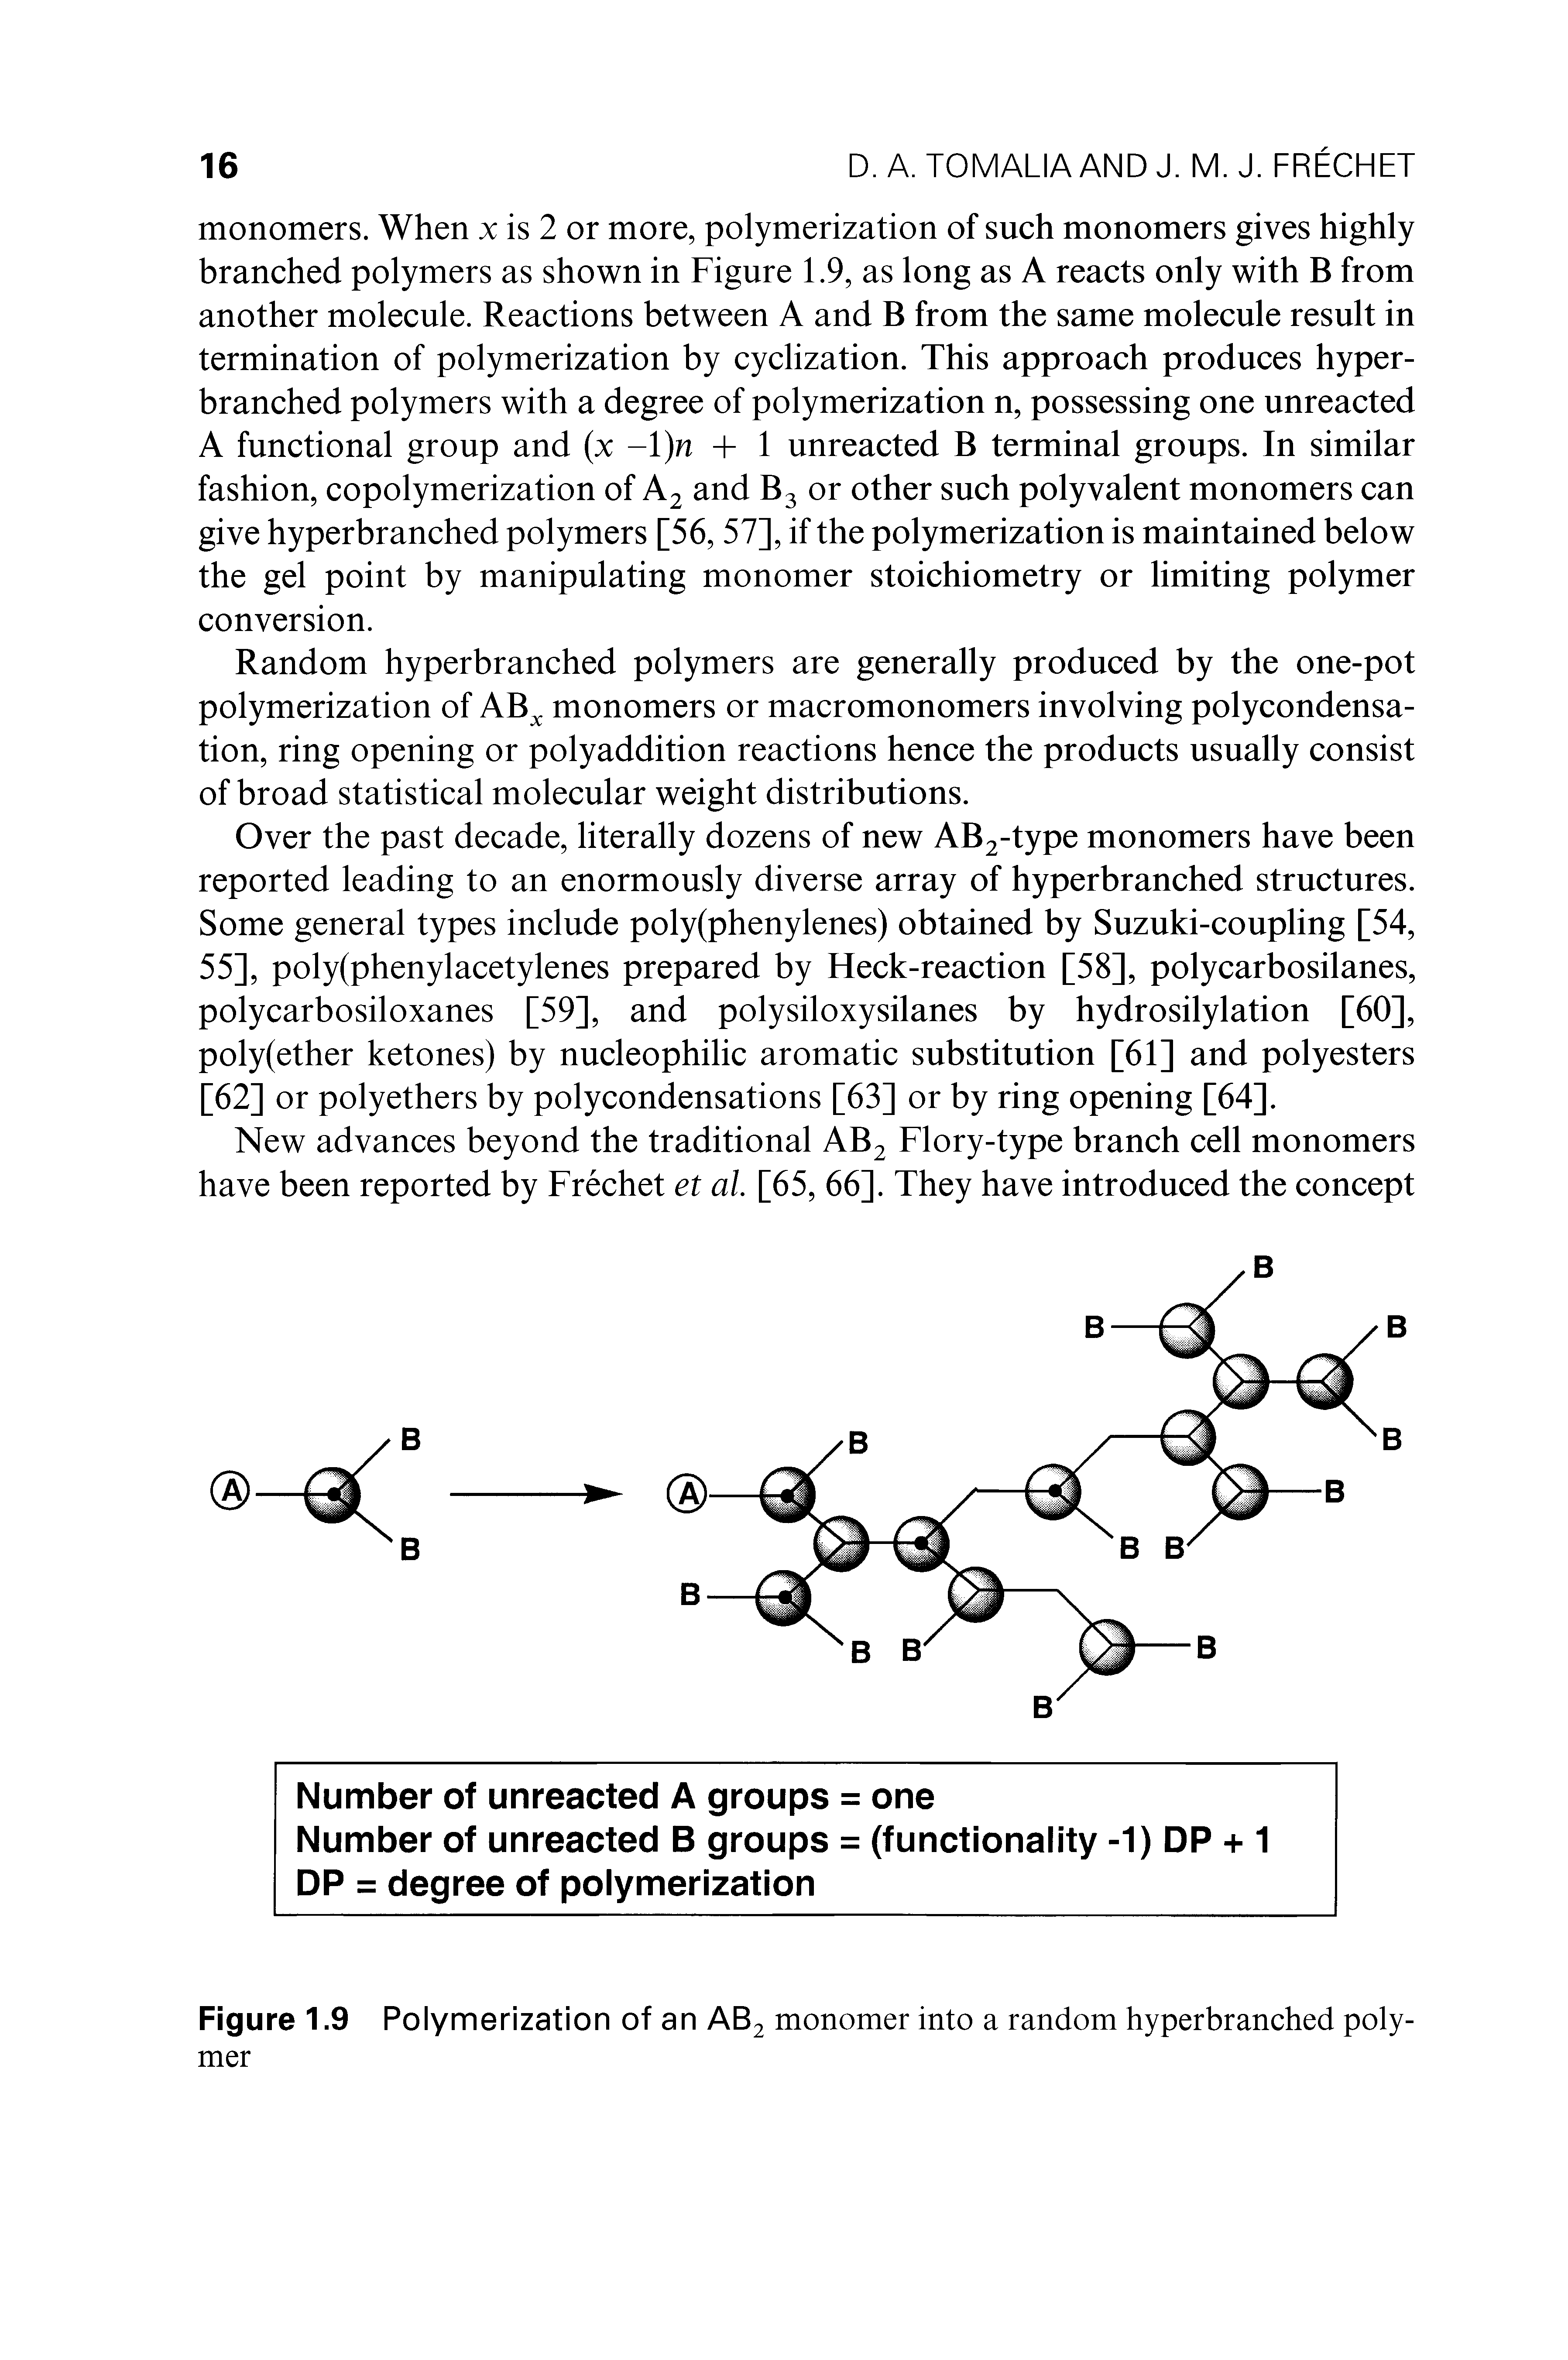 Figure 1.9 Polymerization of an AB2 monomer into a random hyperbranched polymer...